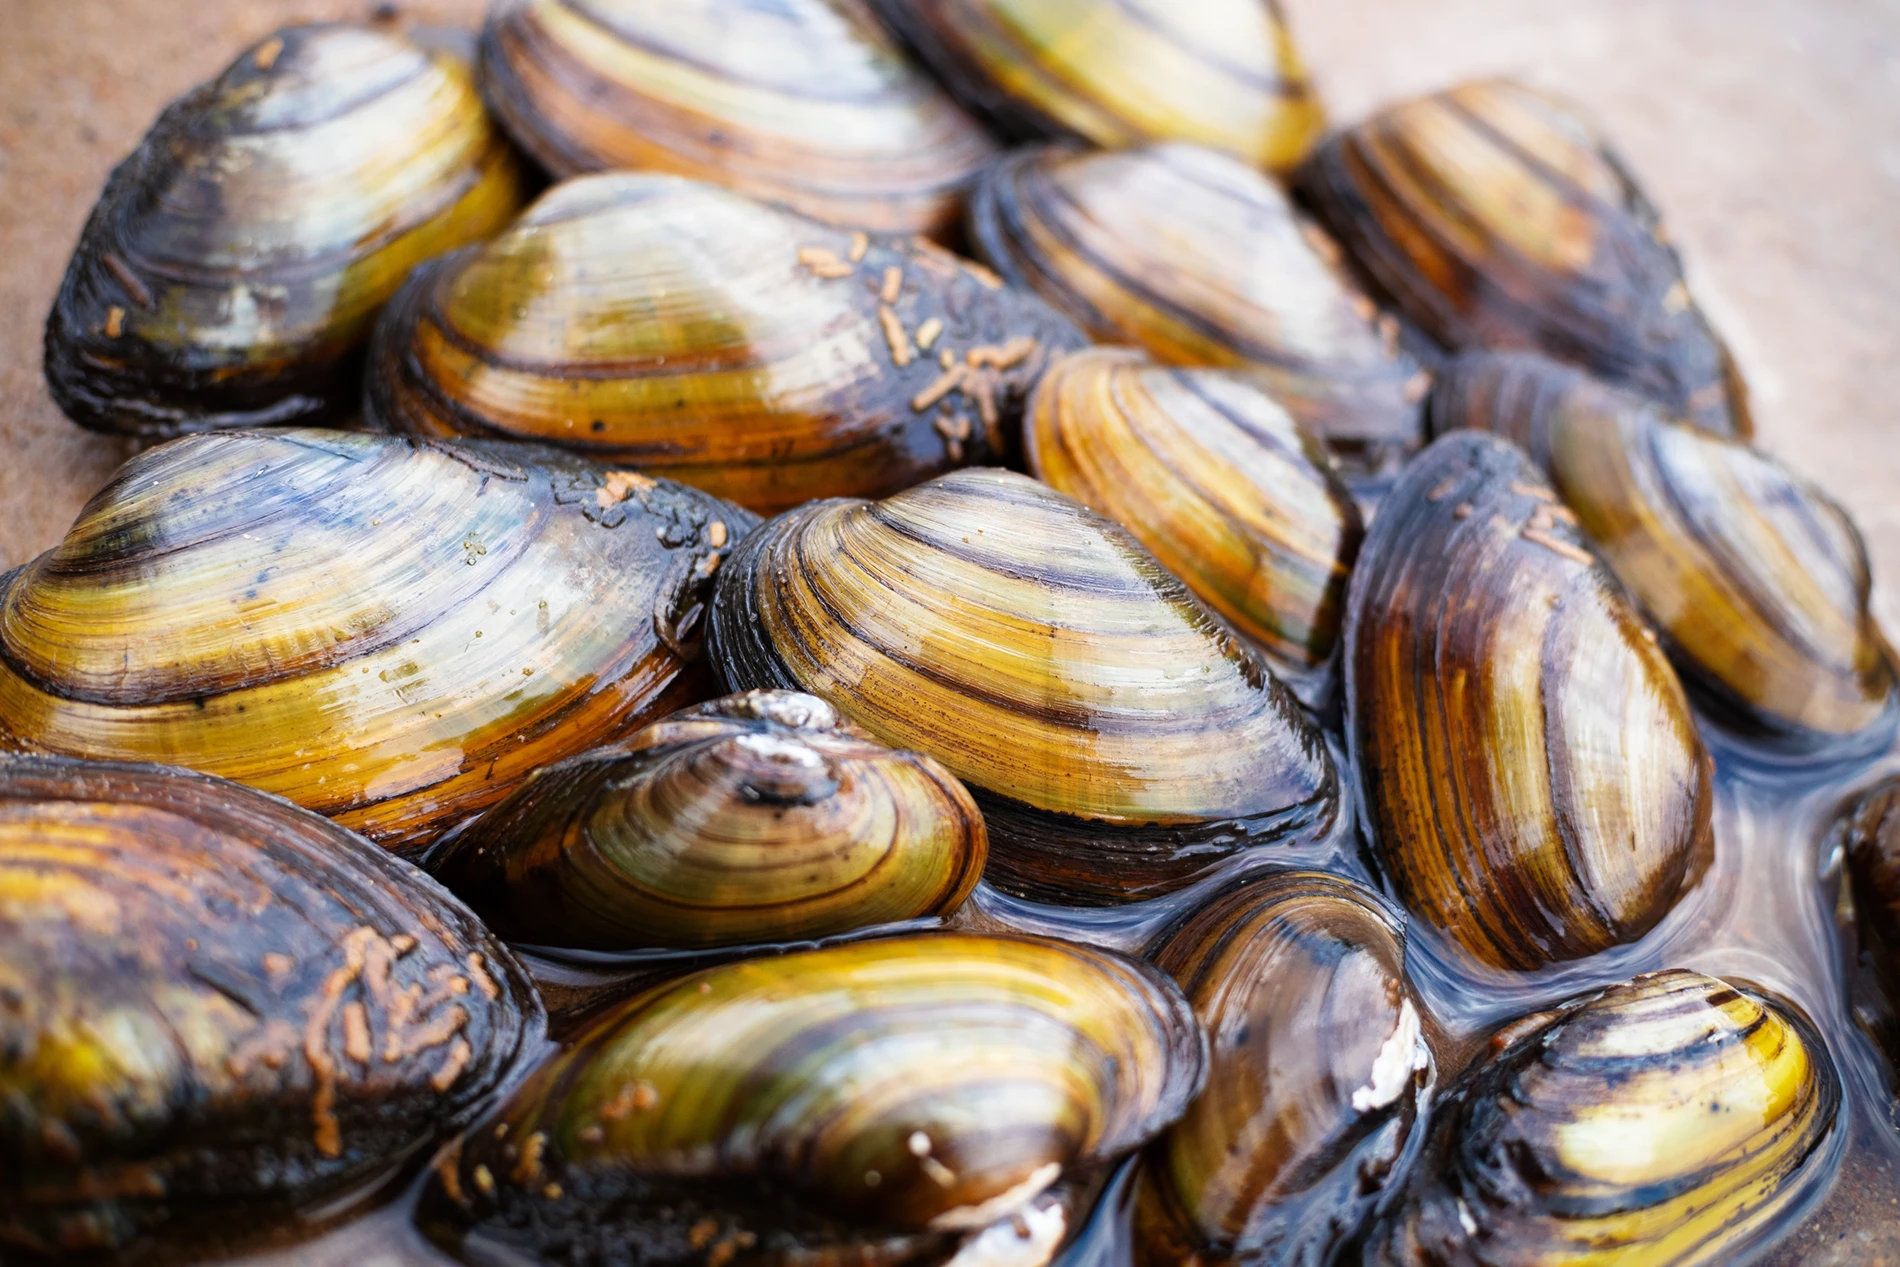 Giant floater mussels saved by a mussel restoration project along the Mississippi River in the Midwest US.